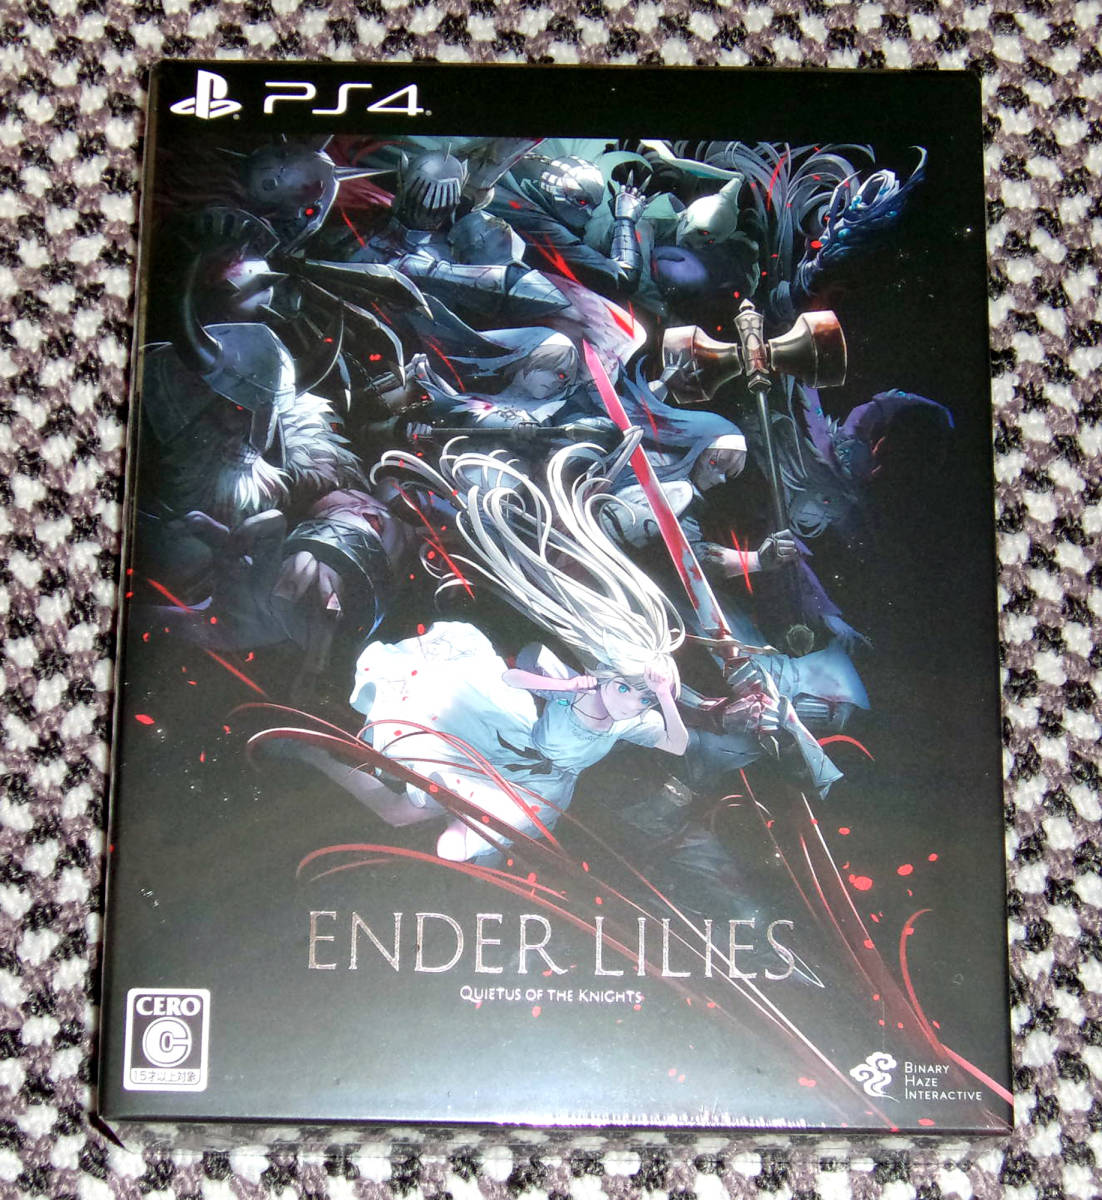 ENDER LILIES: Quietus of the Knights/PS4【数量限定】アートブック・サウンドトラック付き/新品未開封 